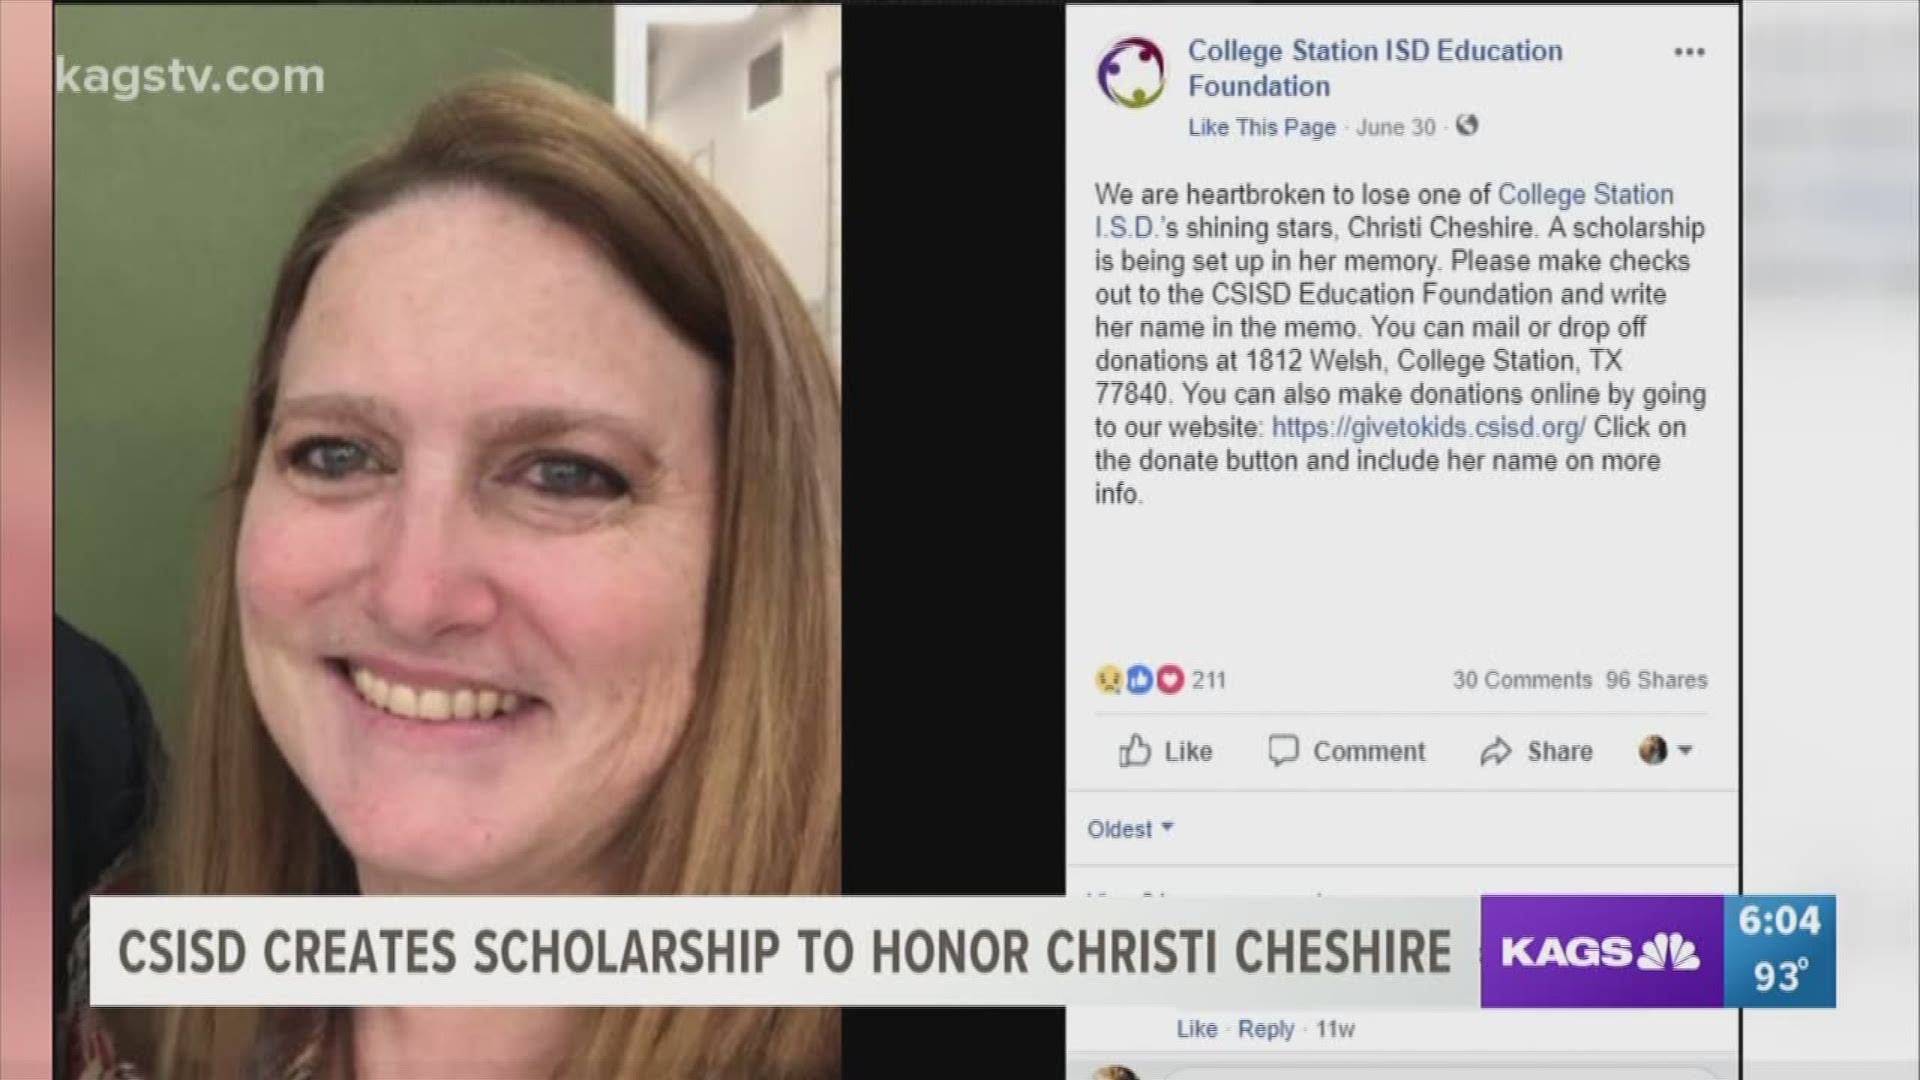 Christi Cheshire worked with CSISD for 24 years, teaching math at Consol High School before working as a testing coordinator, and most recently she served as the dean of students.